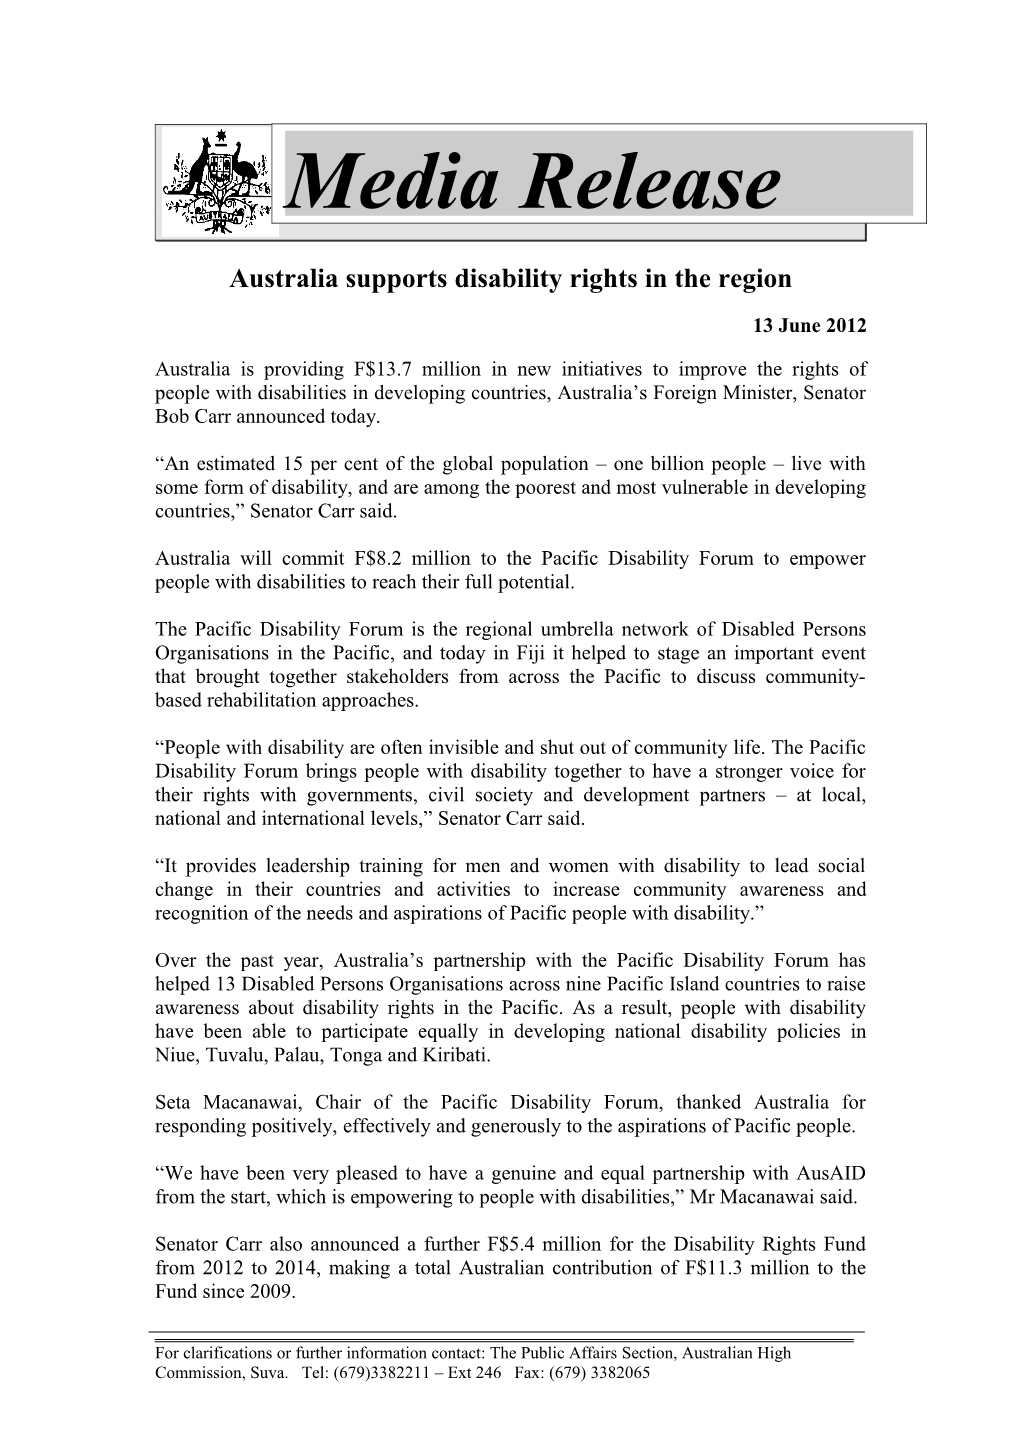 Australia Supports Disability Rights in the Region